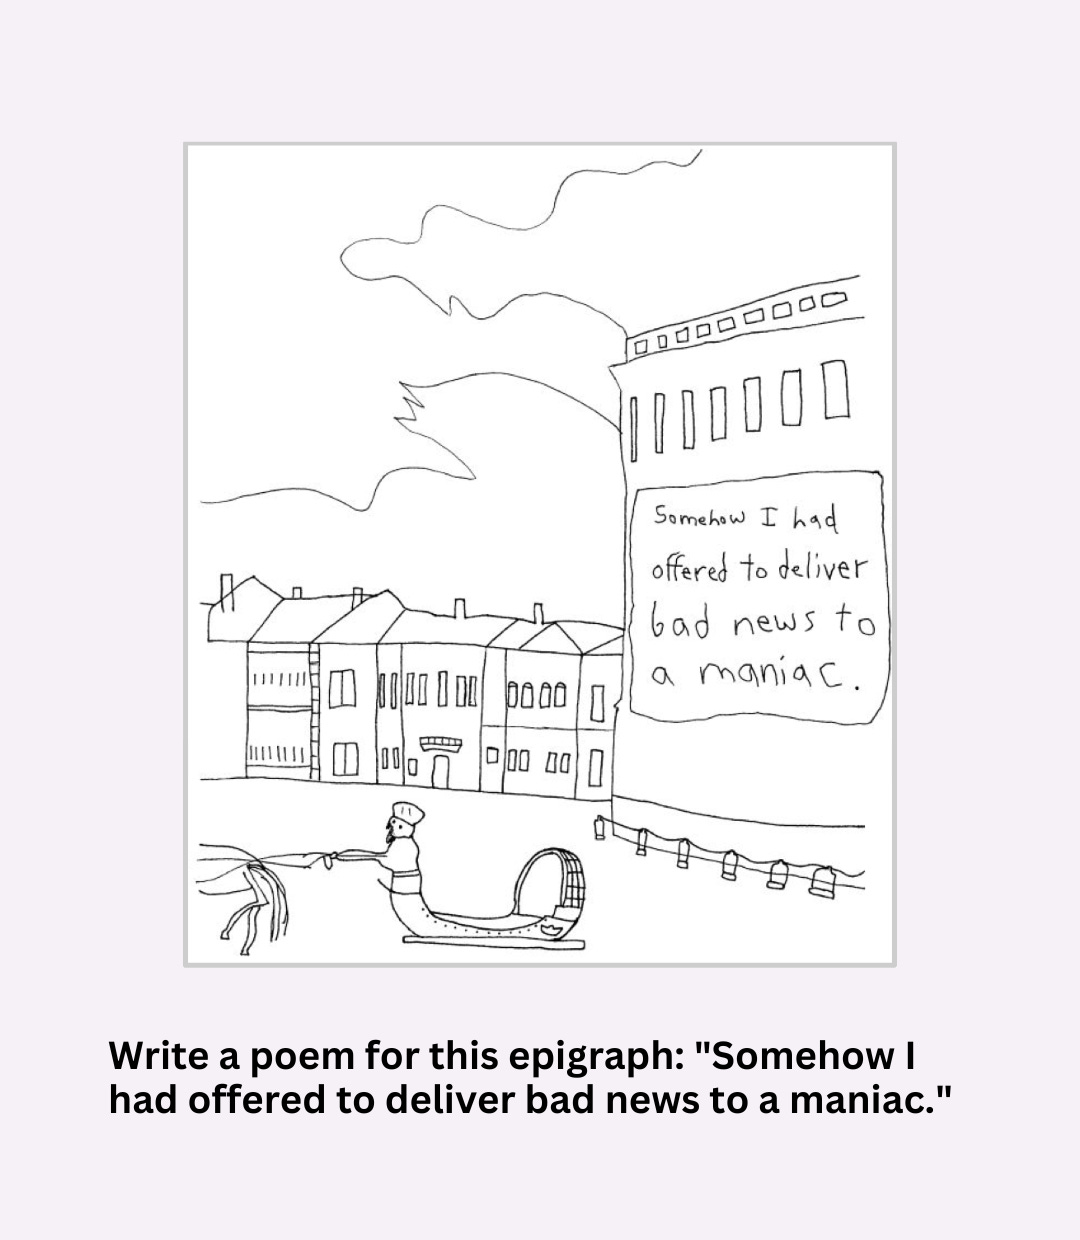 Text reads: "Write a poem for this epigraph: 'Somehow I had offered to deliver bad news to a maniac.'" The image is a drawing of a city on the water. There is a person in a boat in the water. On the side of the building is the sentence "Somehow I had offered to deliver bad news to a maniac."